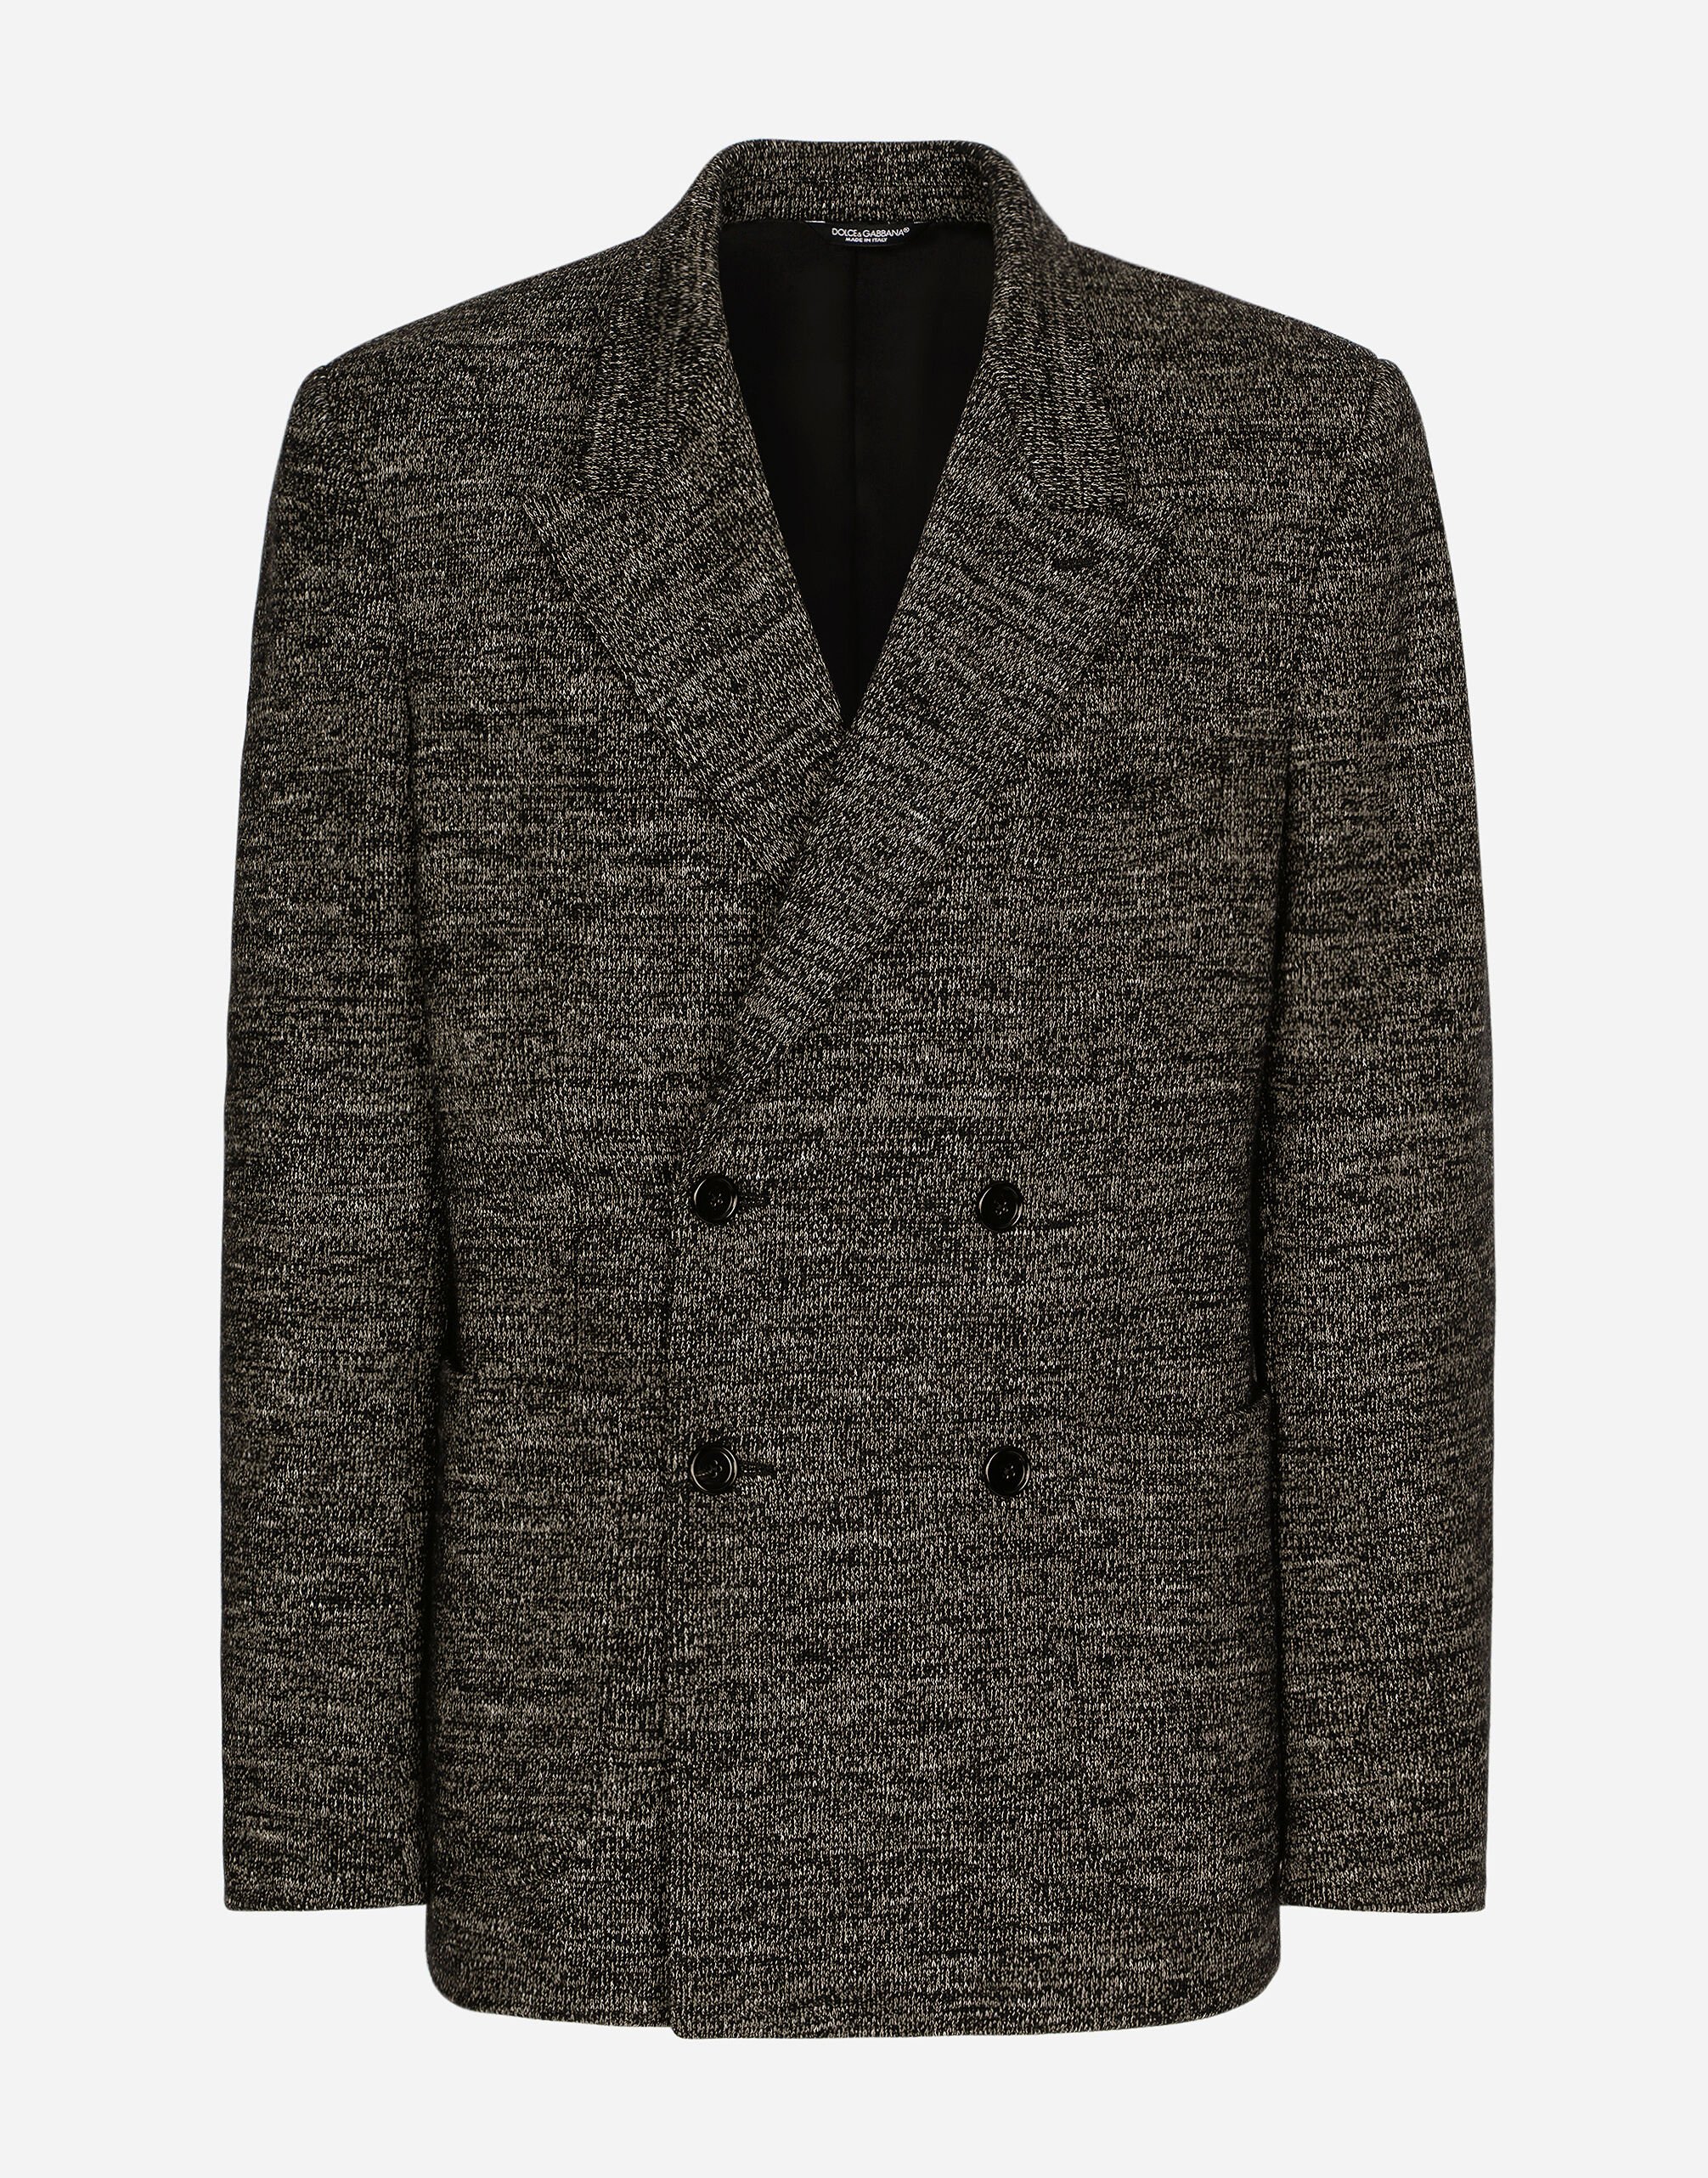 Dolce & Gabbana Double-breasted cotton and wool jersey jacket Black G9ZU0ZG7K4P